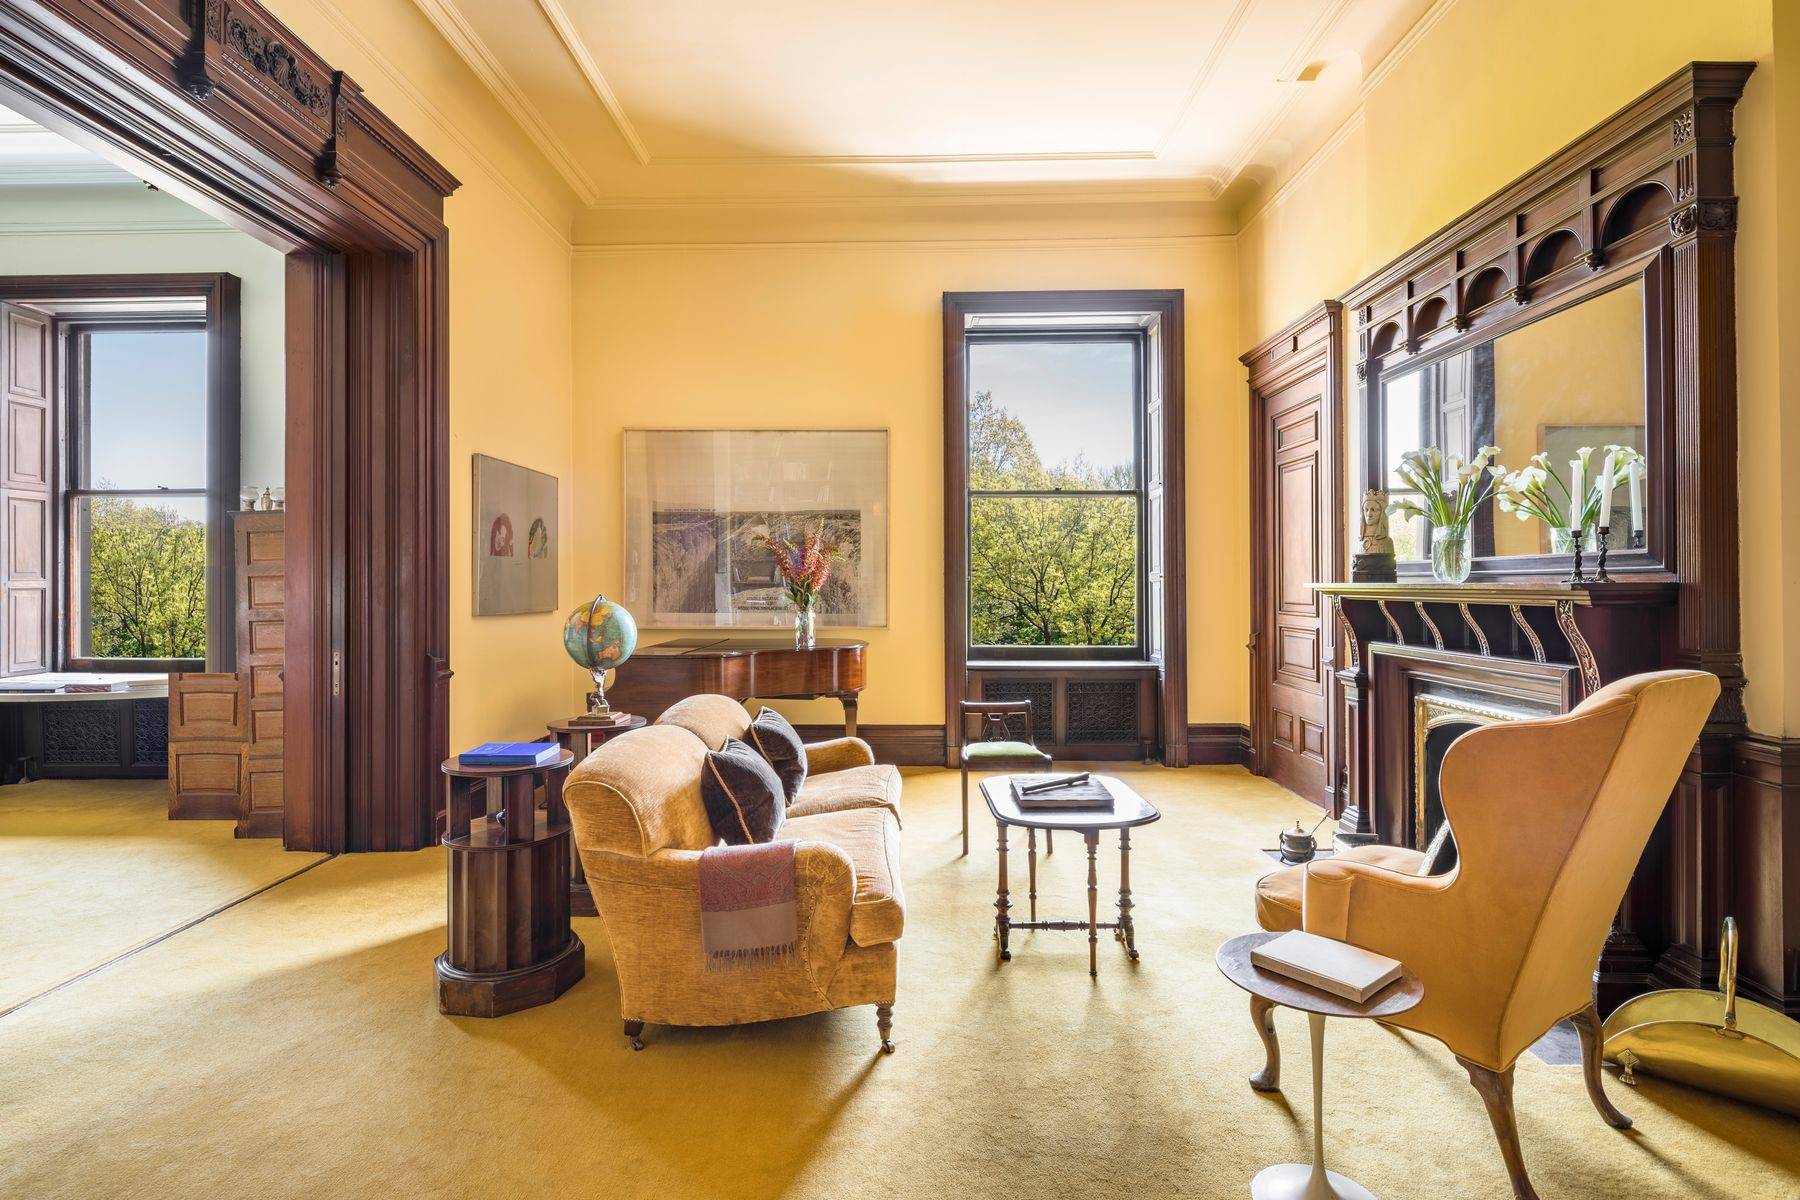 Distinguished by four principal rooms overlooking Central Park and the southern city skyline, this grandly scaled apartment features a total of 57 linear feet of direct park frontage.